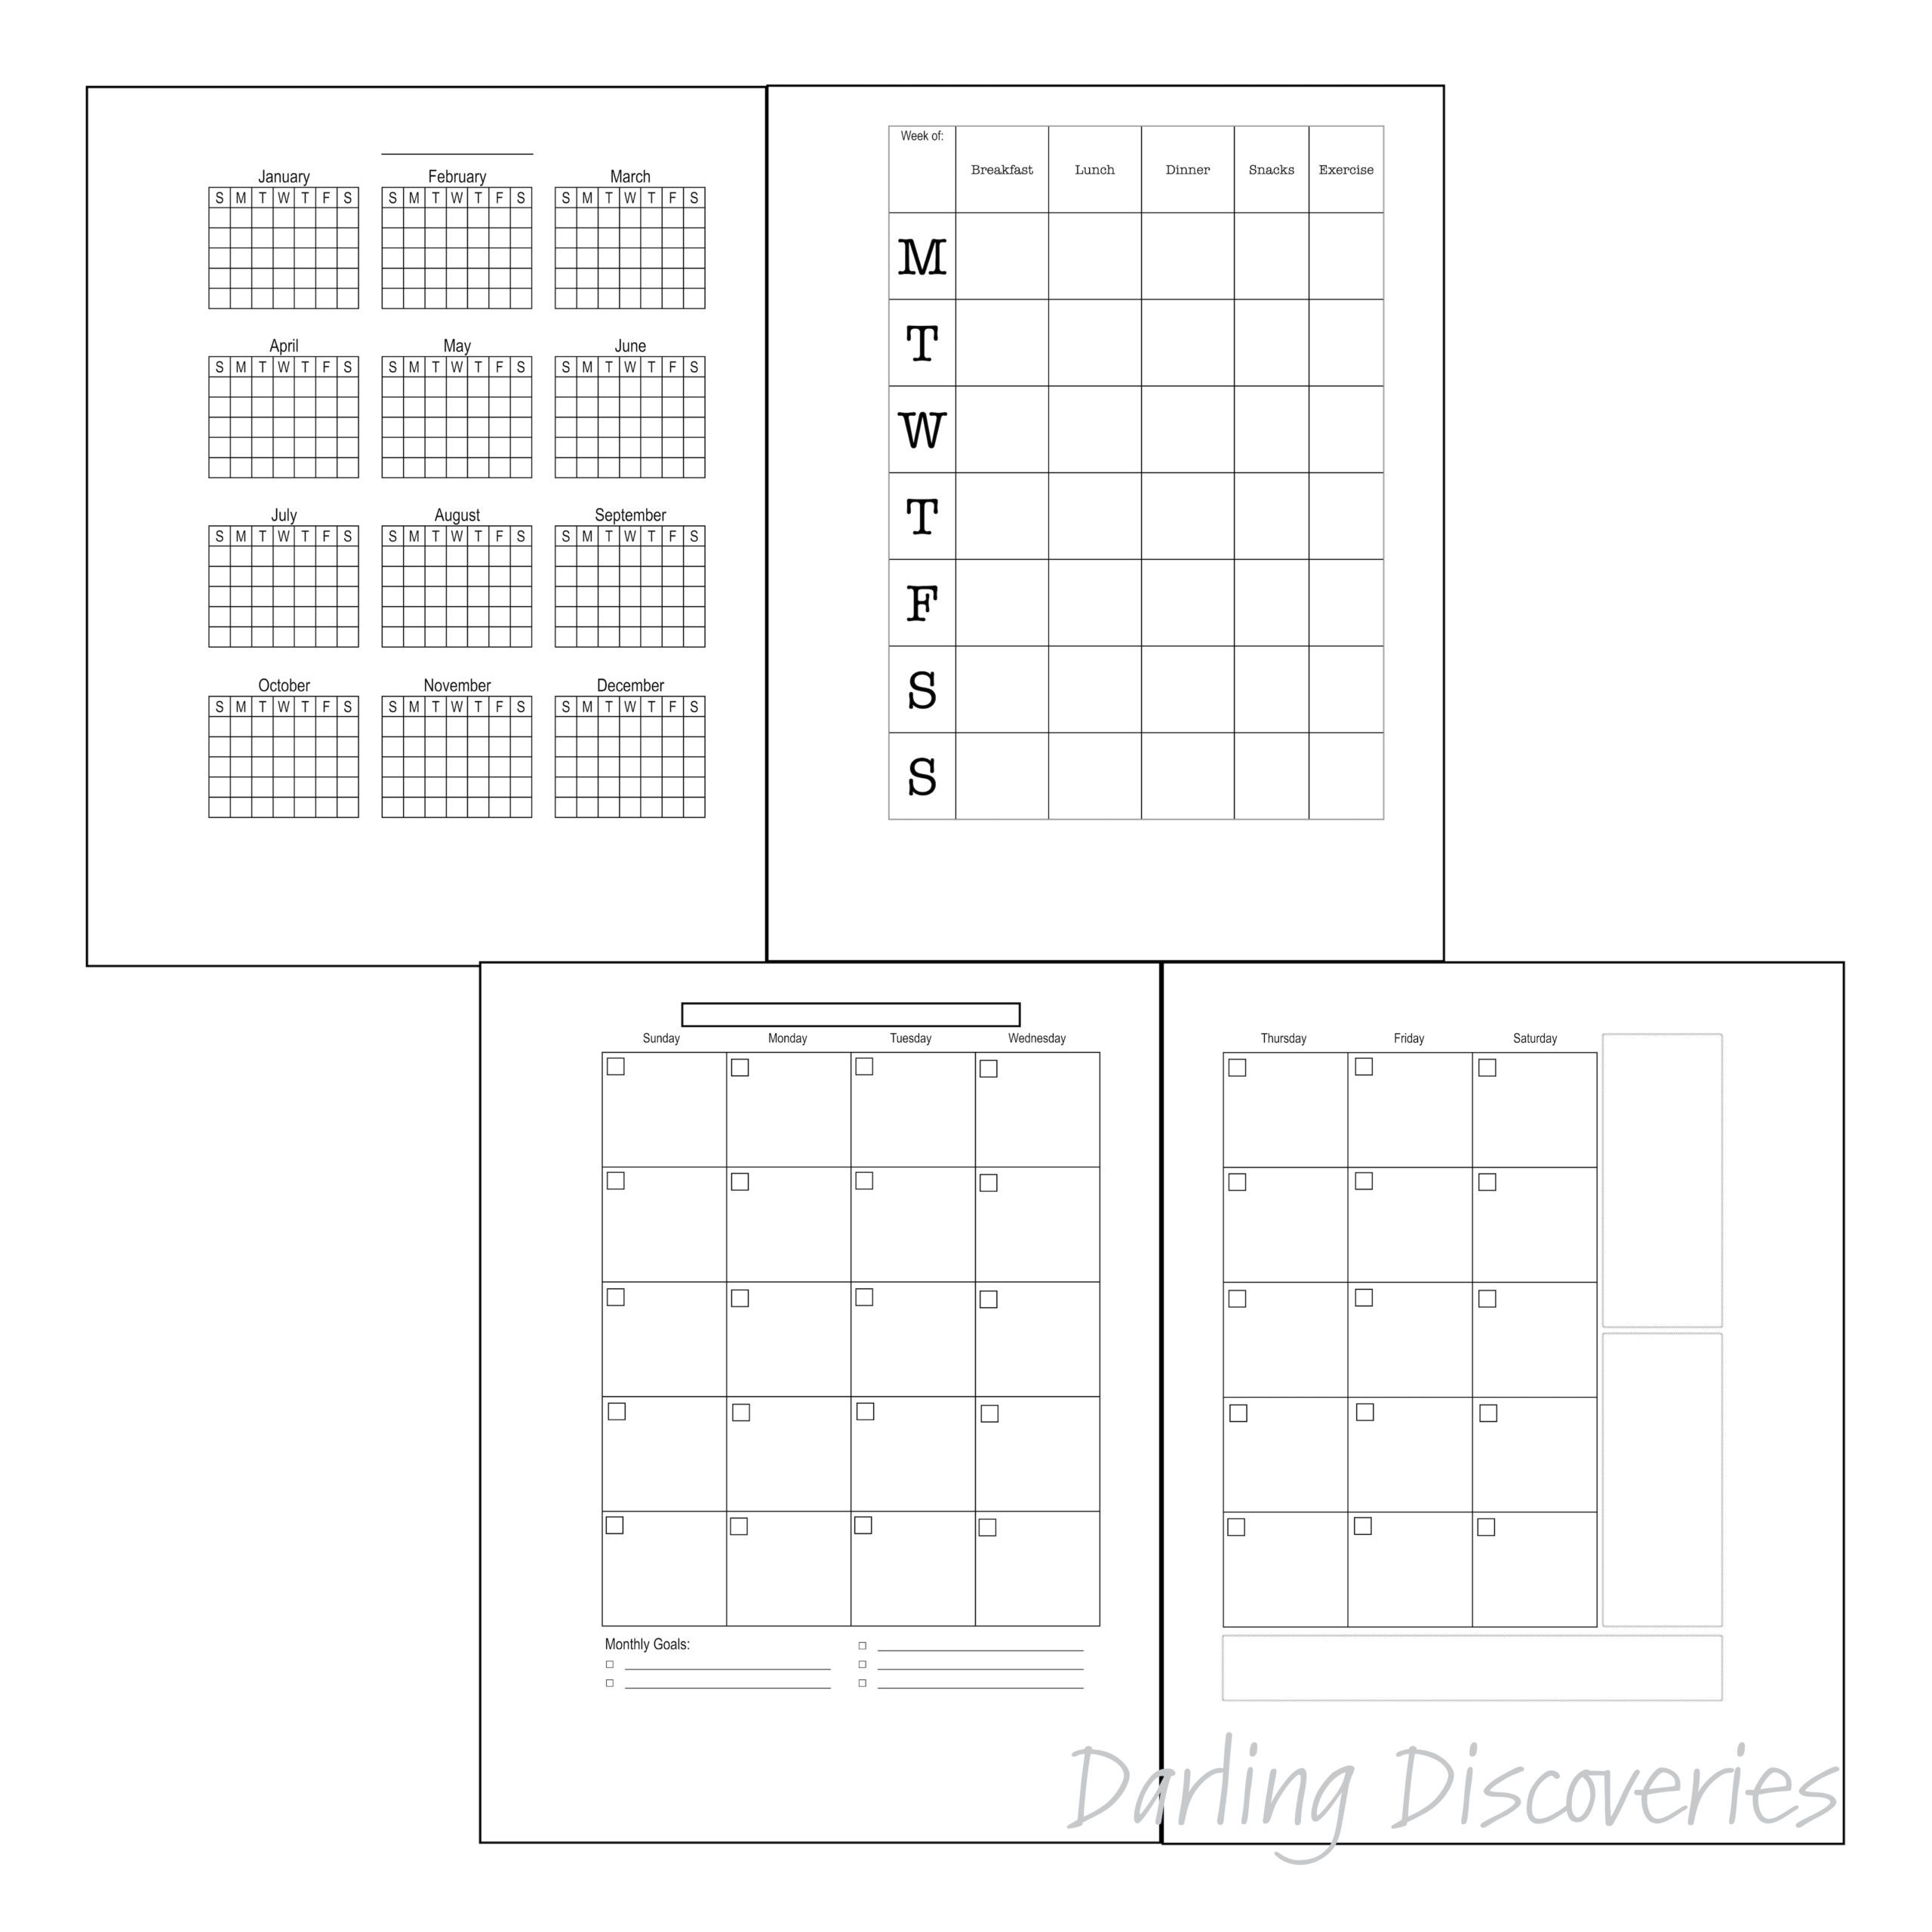 darlingdiscoveries-Planner Promo page 1